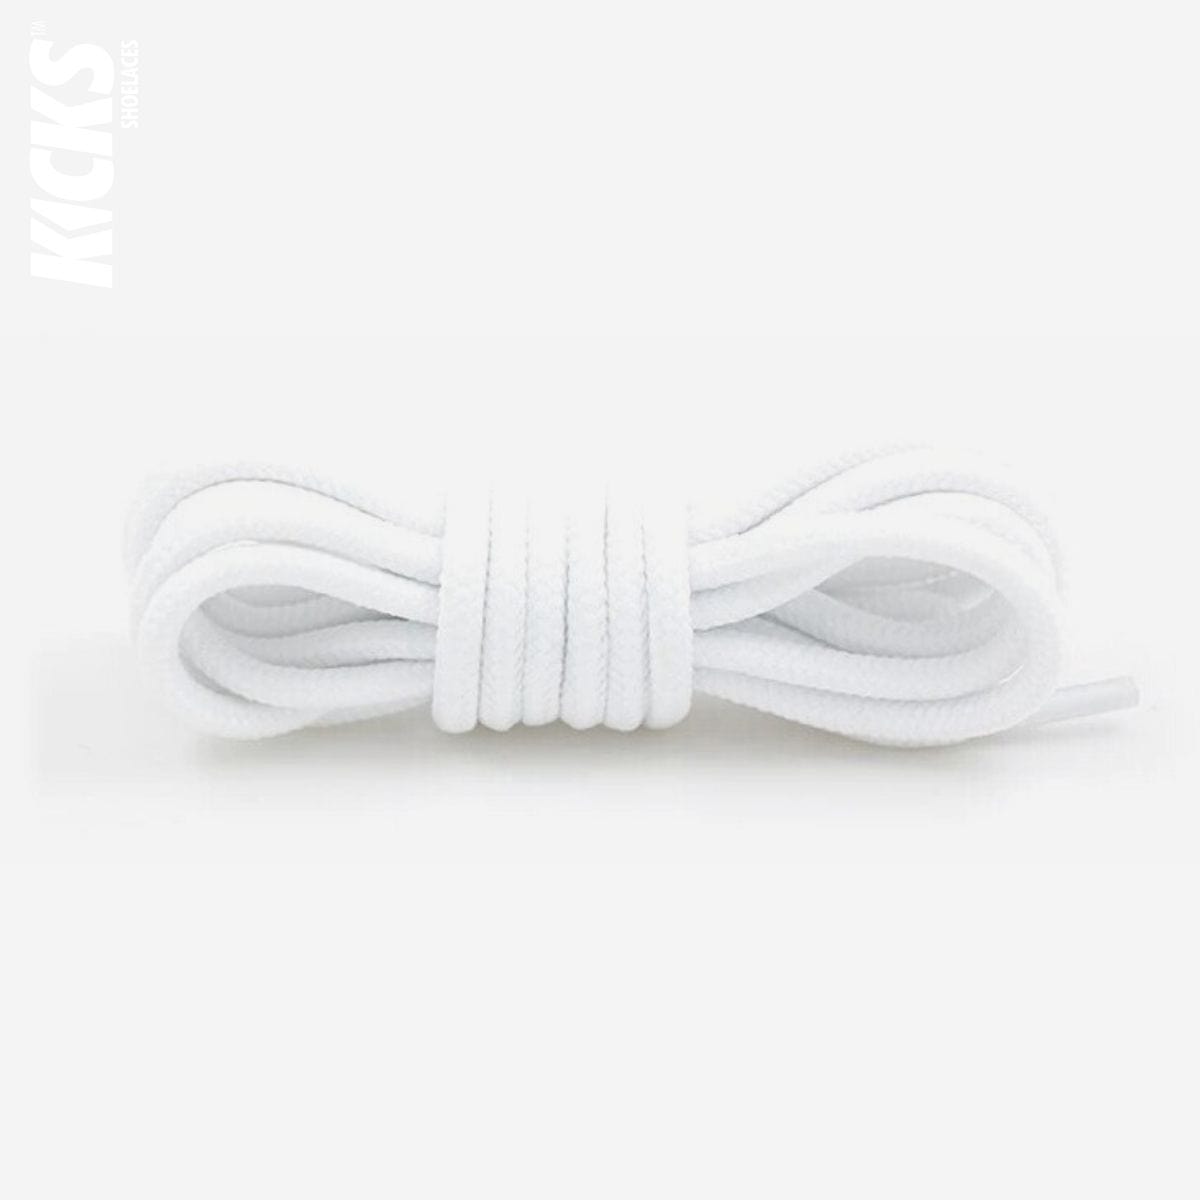 Nike Air Max 720 Replacement Shoelaces